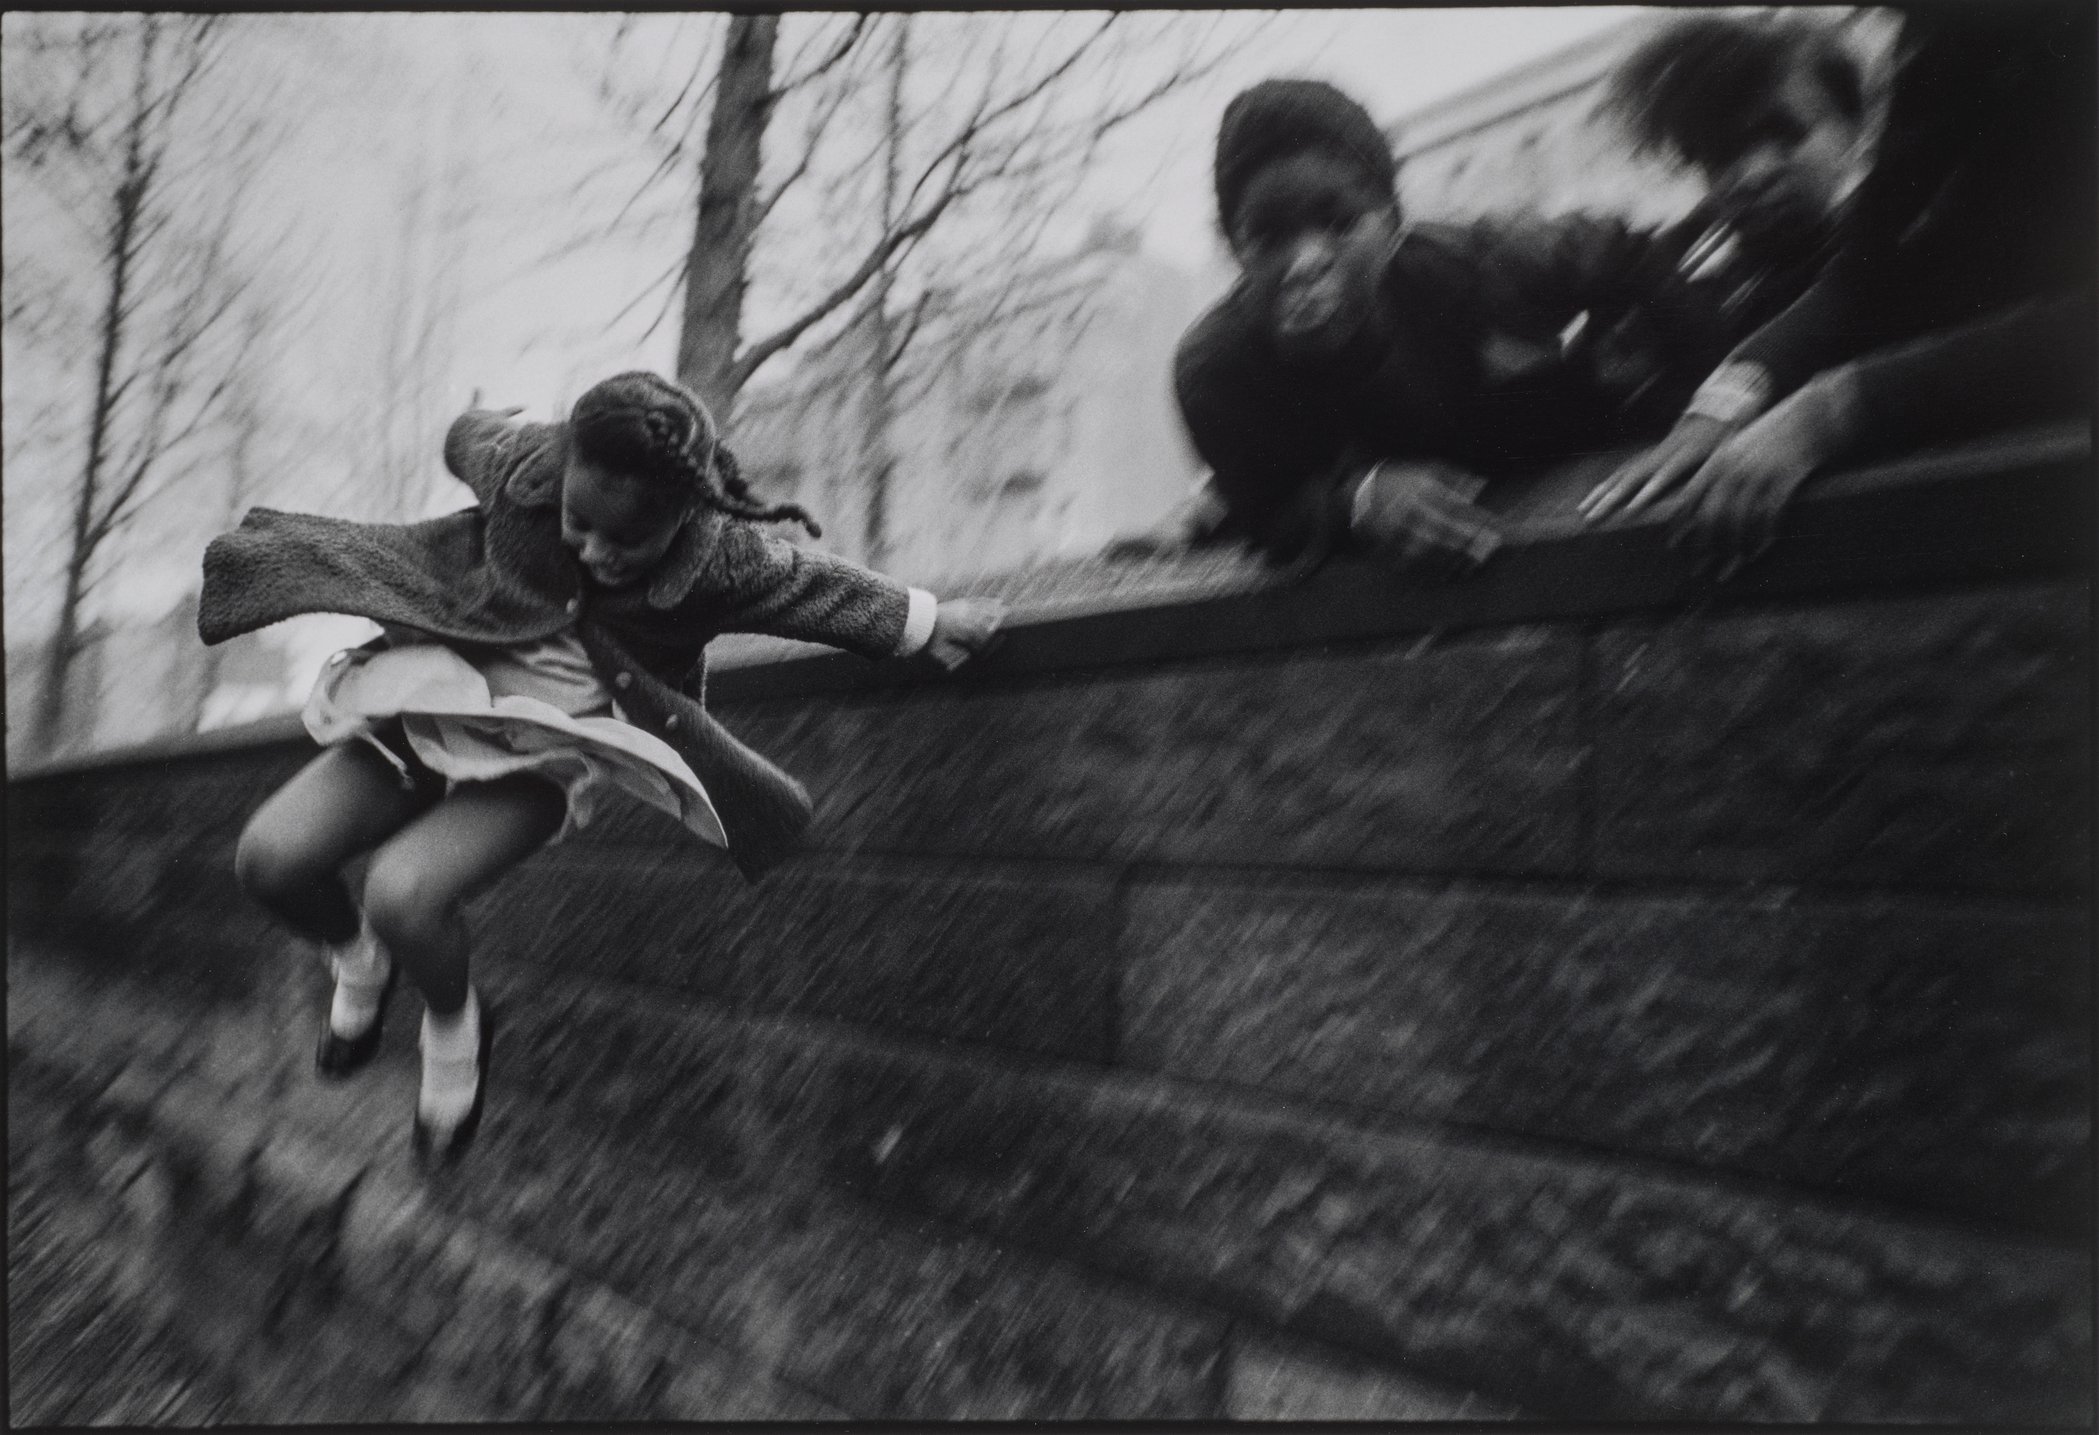 Mary Ellen Mark, Girl Jumping over a Wall, Central Park, New York City, 1967 (printed later); Gelatin silver print, 16 x 20 in.; NMWA, Gift of Jill and Jeffrey Stern; Photo by Lee Stalsworth; © Mary Ellen Mark/The Mary Ellen Mark Foundation